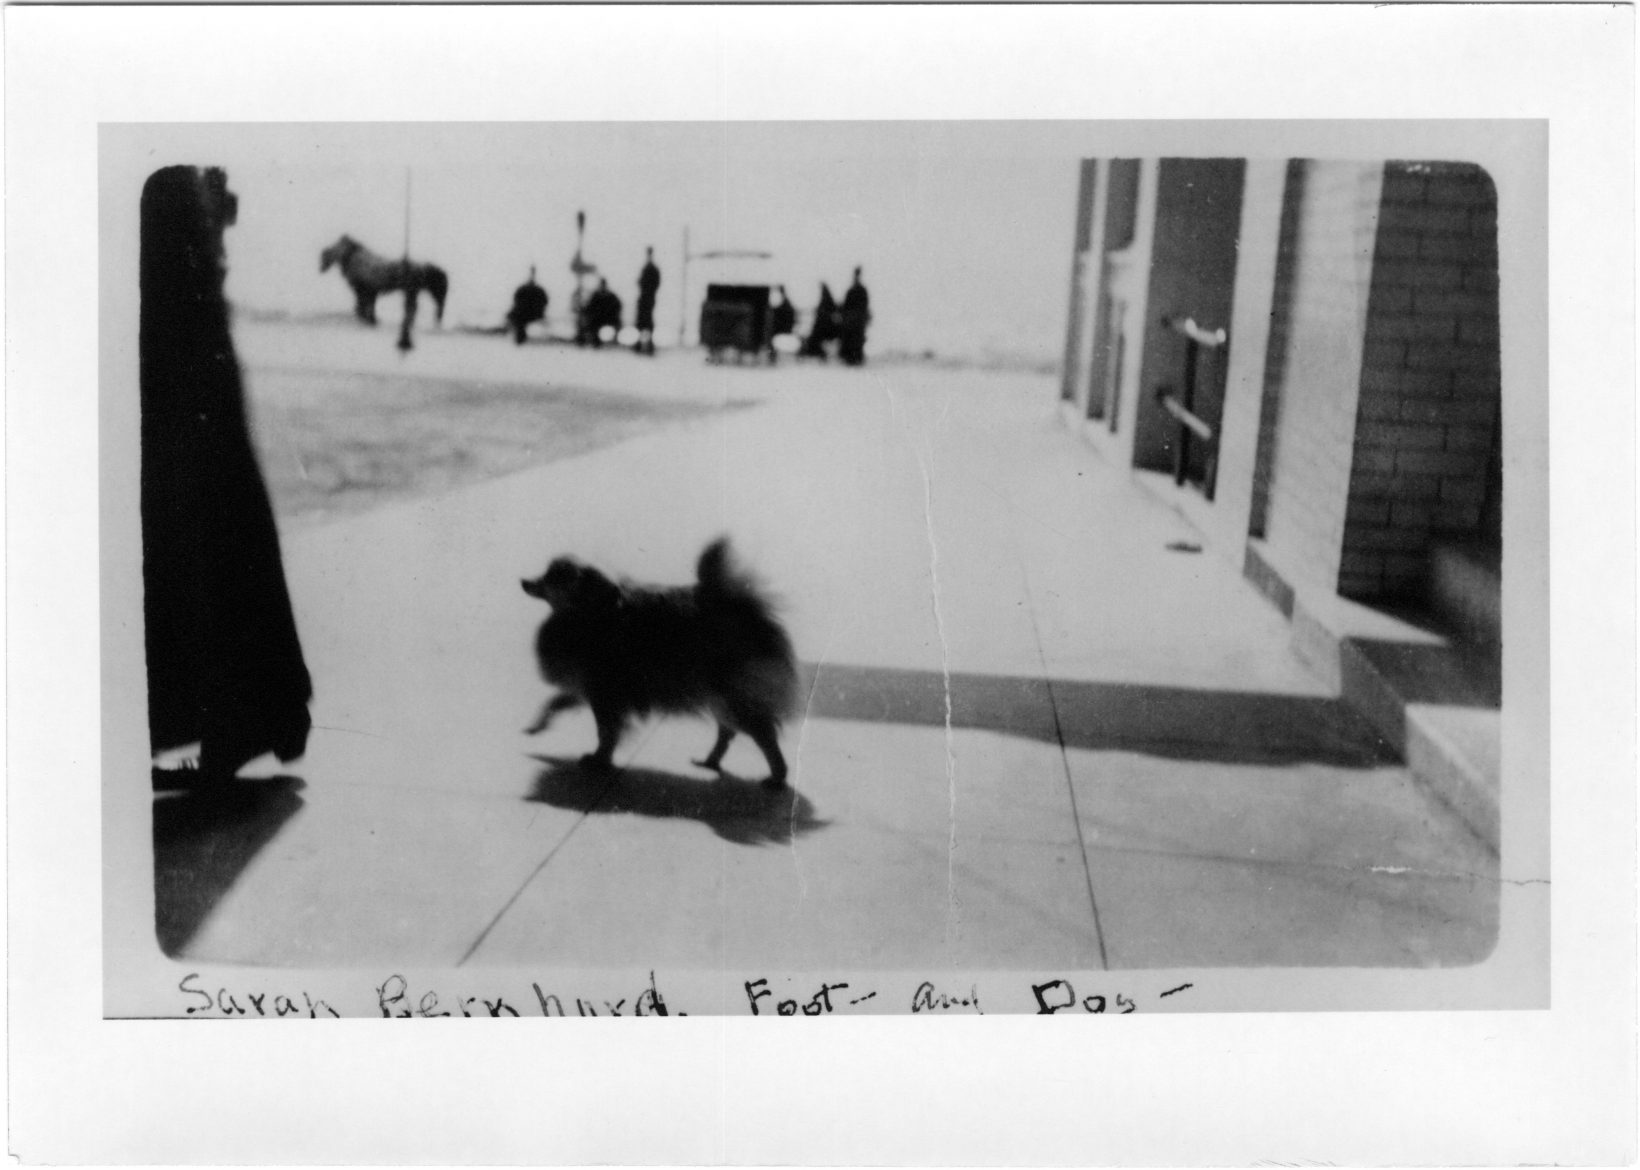 From Sarah Bernhard, foot and dog. Sysid 99980. Scanned as tiff in 2008/10/21 by MDAH. Credit: Courtesy of the Mississippi Department of Archives and History